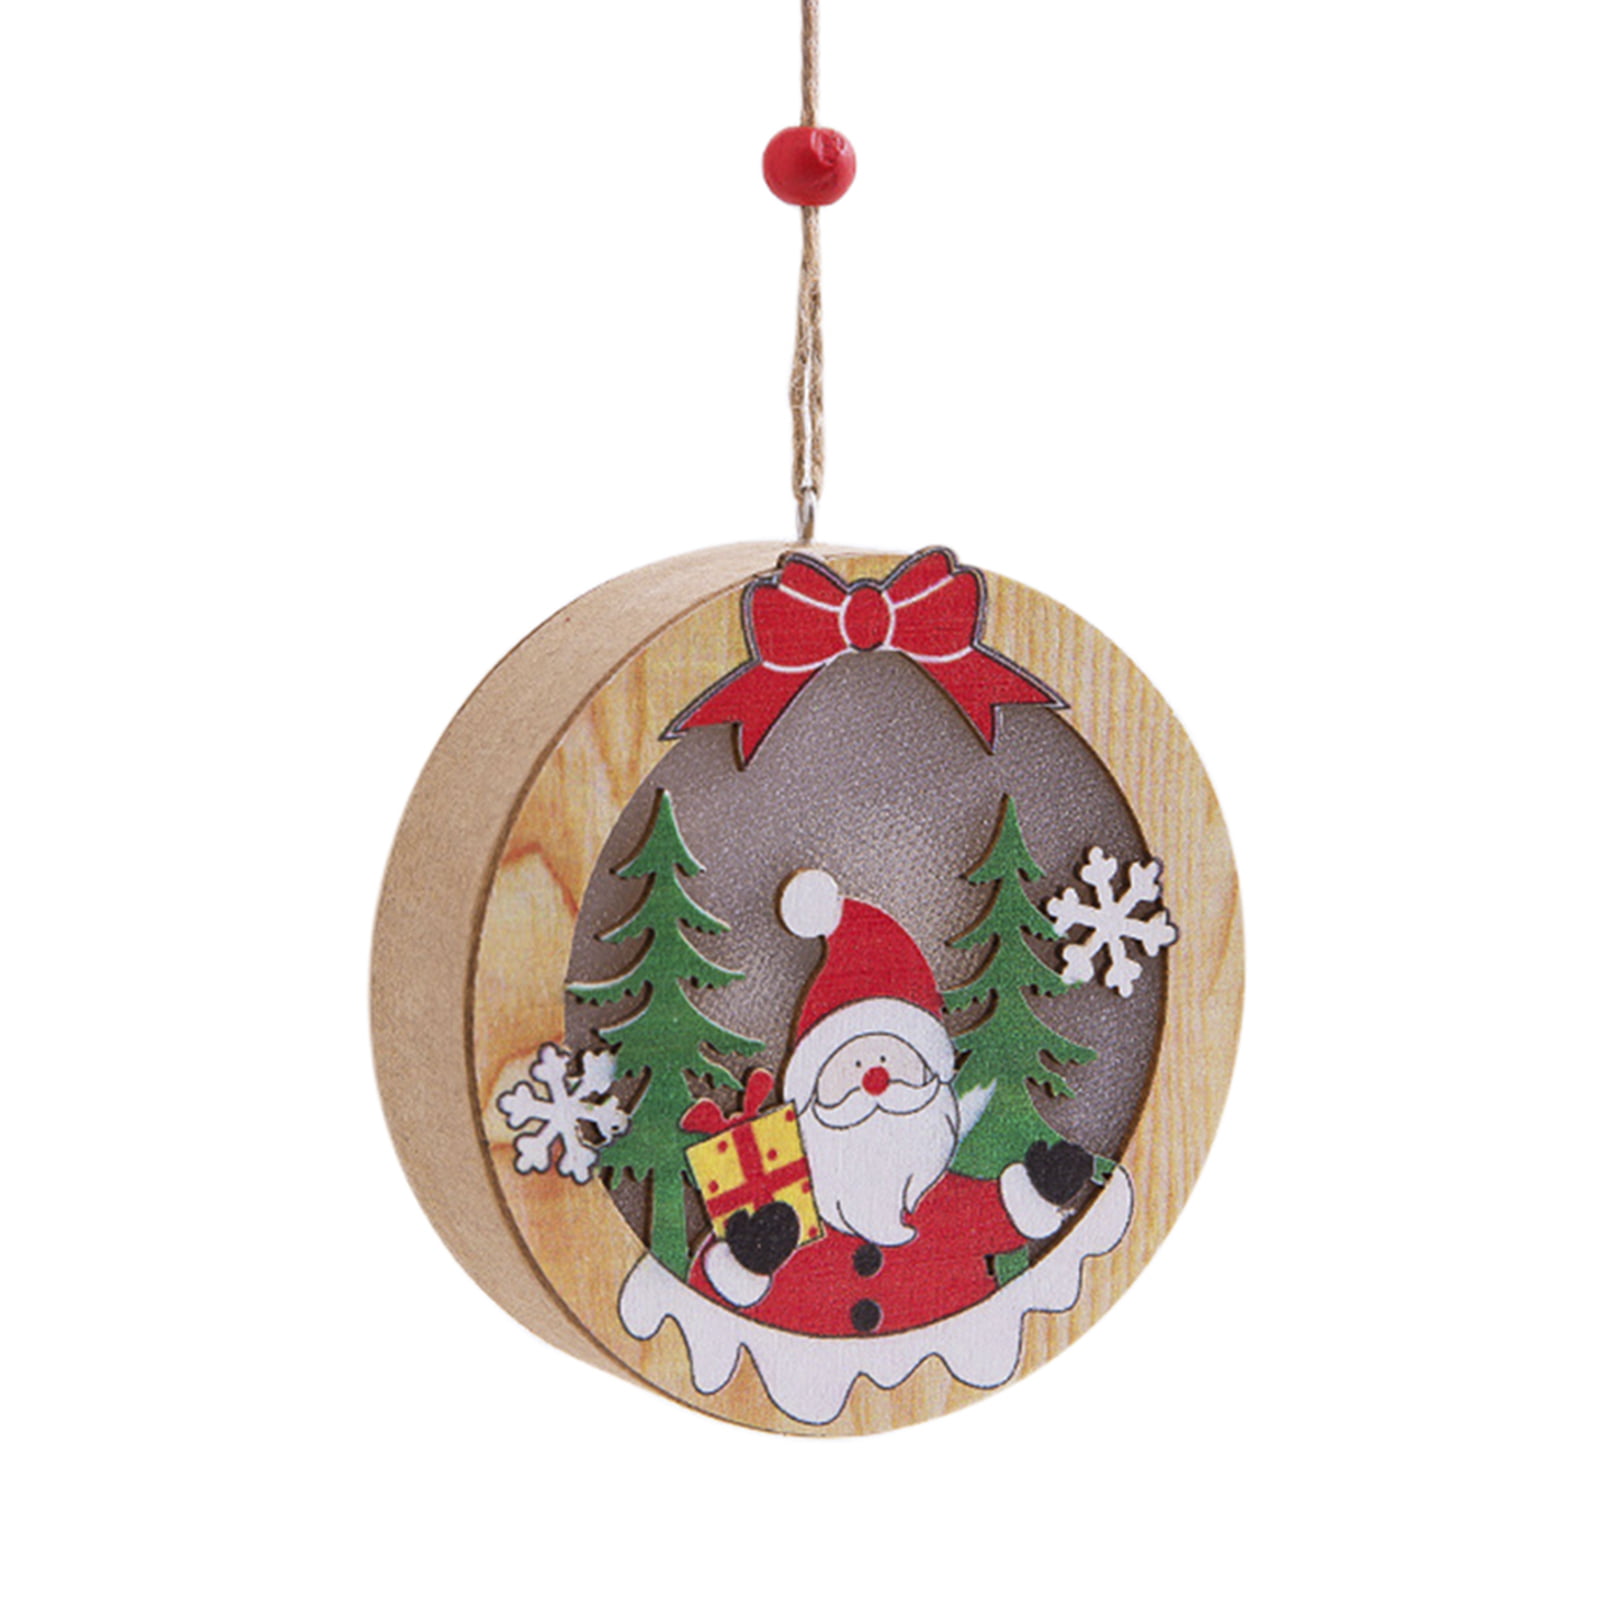 Details about   Xmas Tree Ornaments Hanging Decoration Christmas Pendant   Santa Wooden Gift 